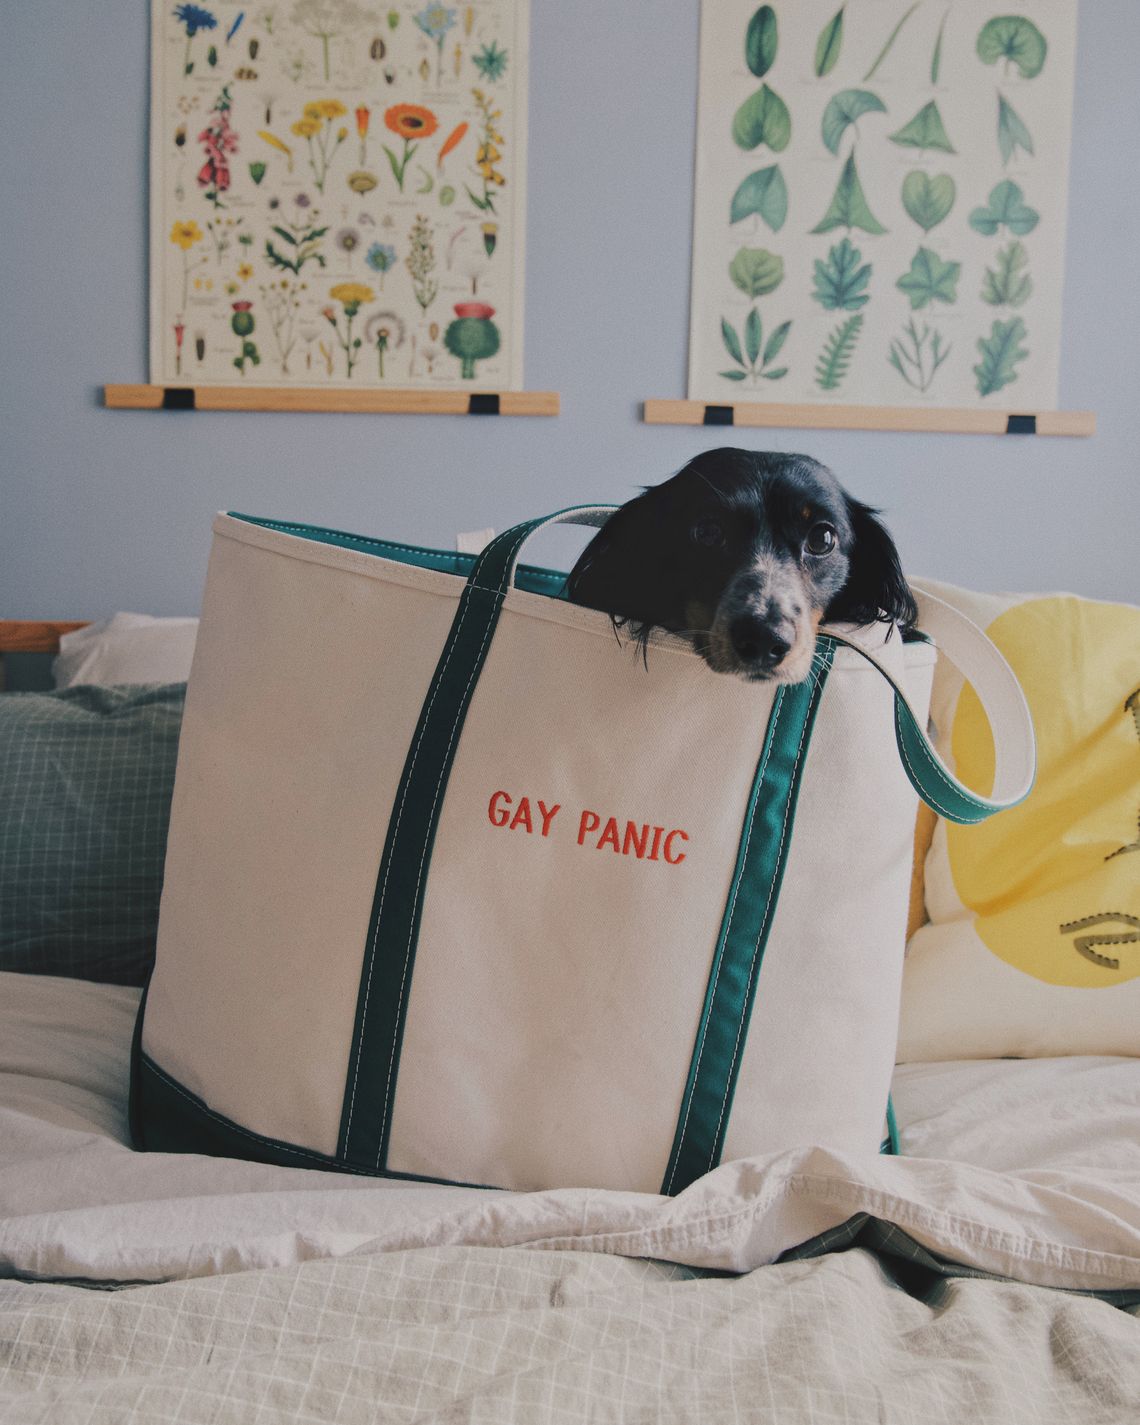 Customers Monogram Their L.L. Bean Tote Bags With a Twist - The